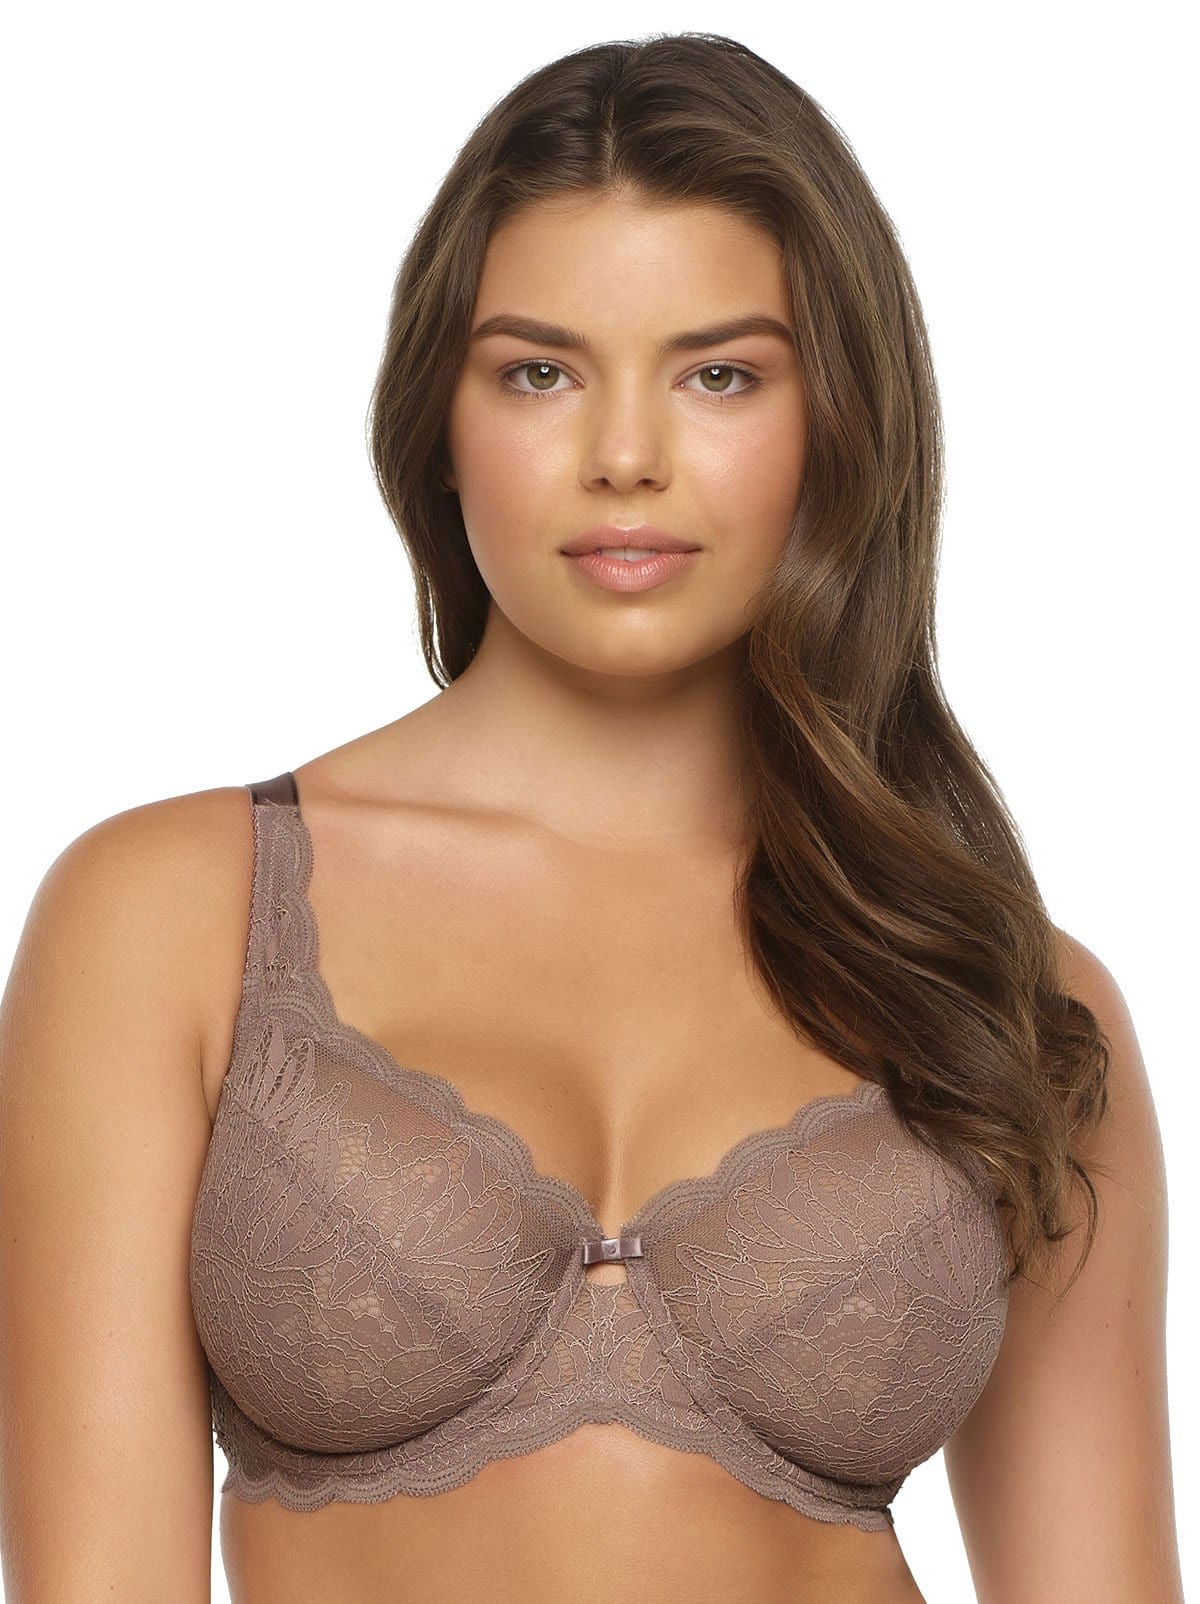 Felina Paramour Peridot Unlined Lace Bra Size 34DD Mink Lace Underwire NEW  - $36 New With Tags - From Shone